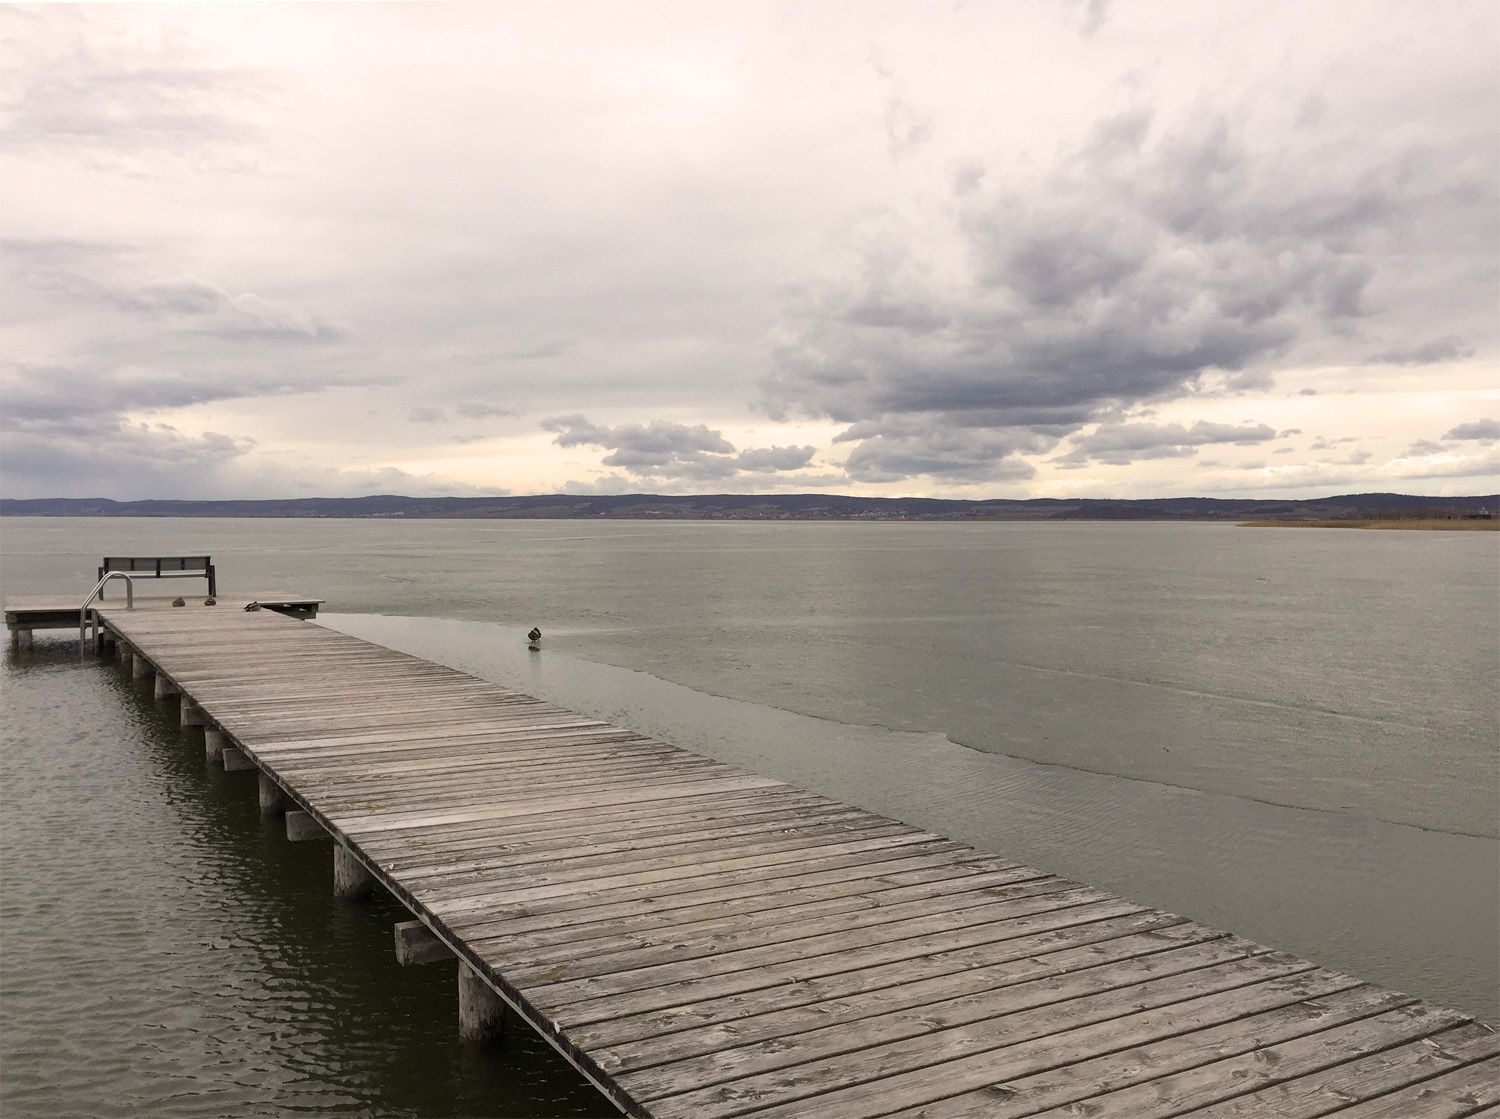 Lake Neusiedl, big grey clouds and a duck